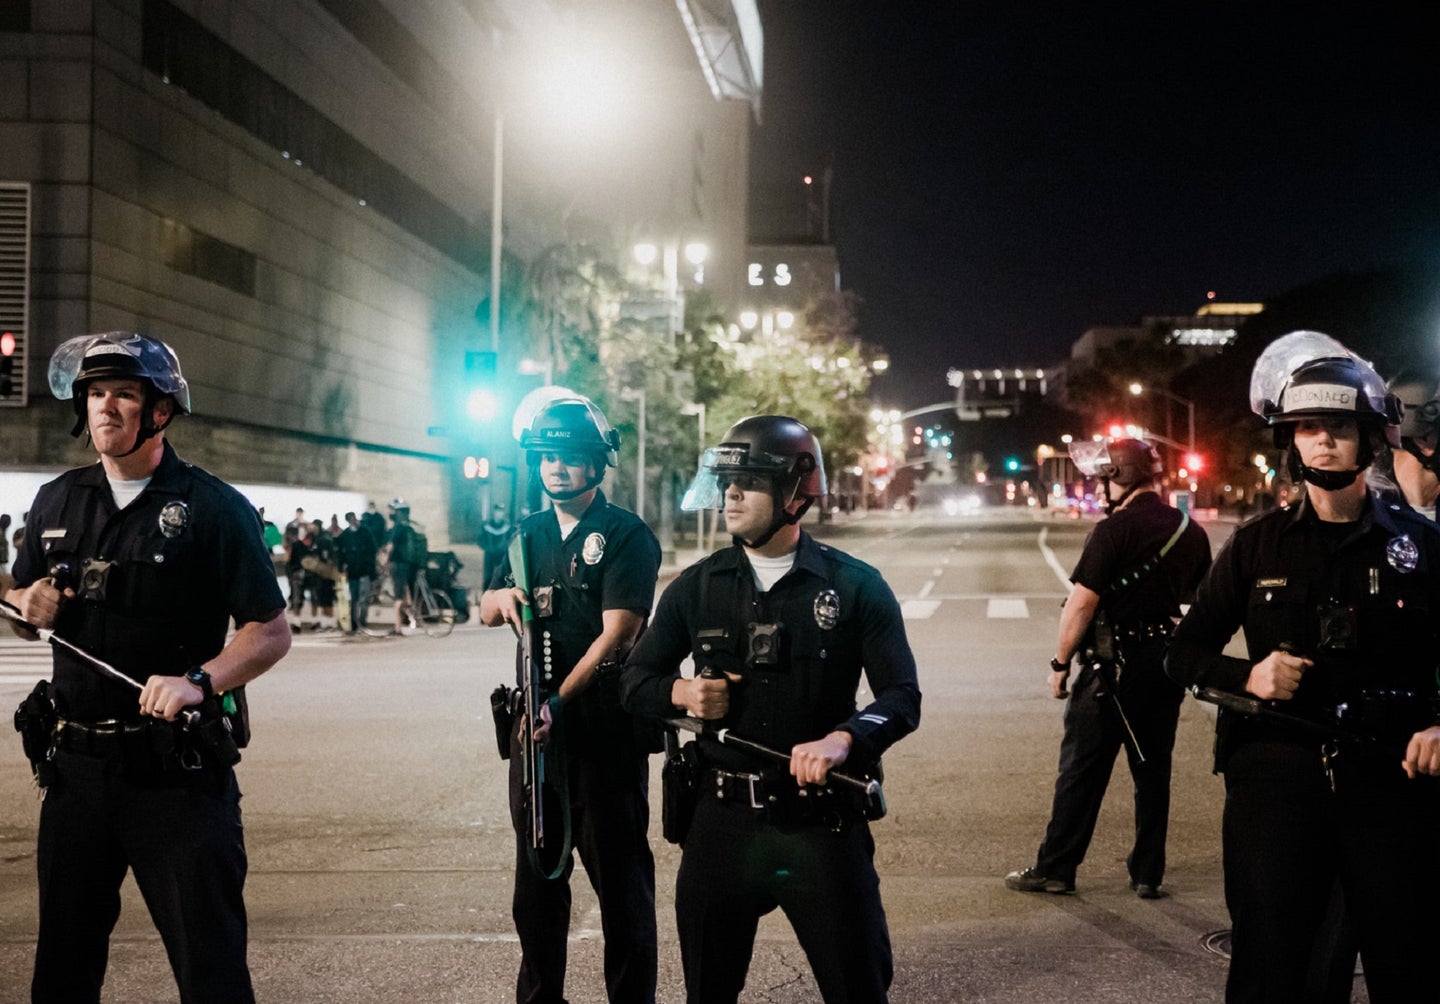 LAPD officers with batons and helmets on the street at night